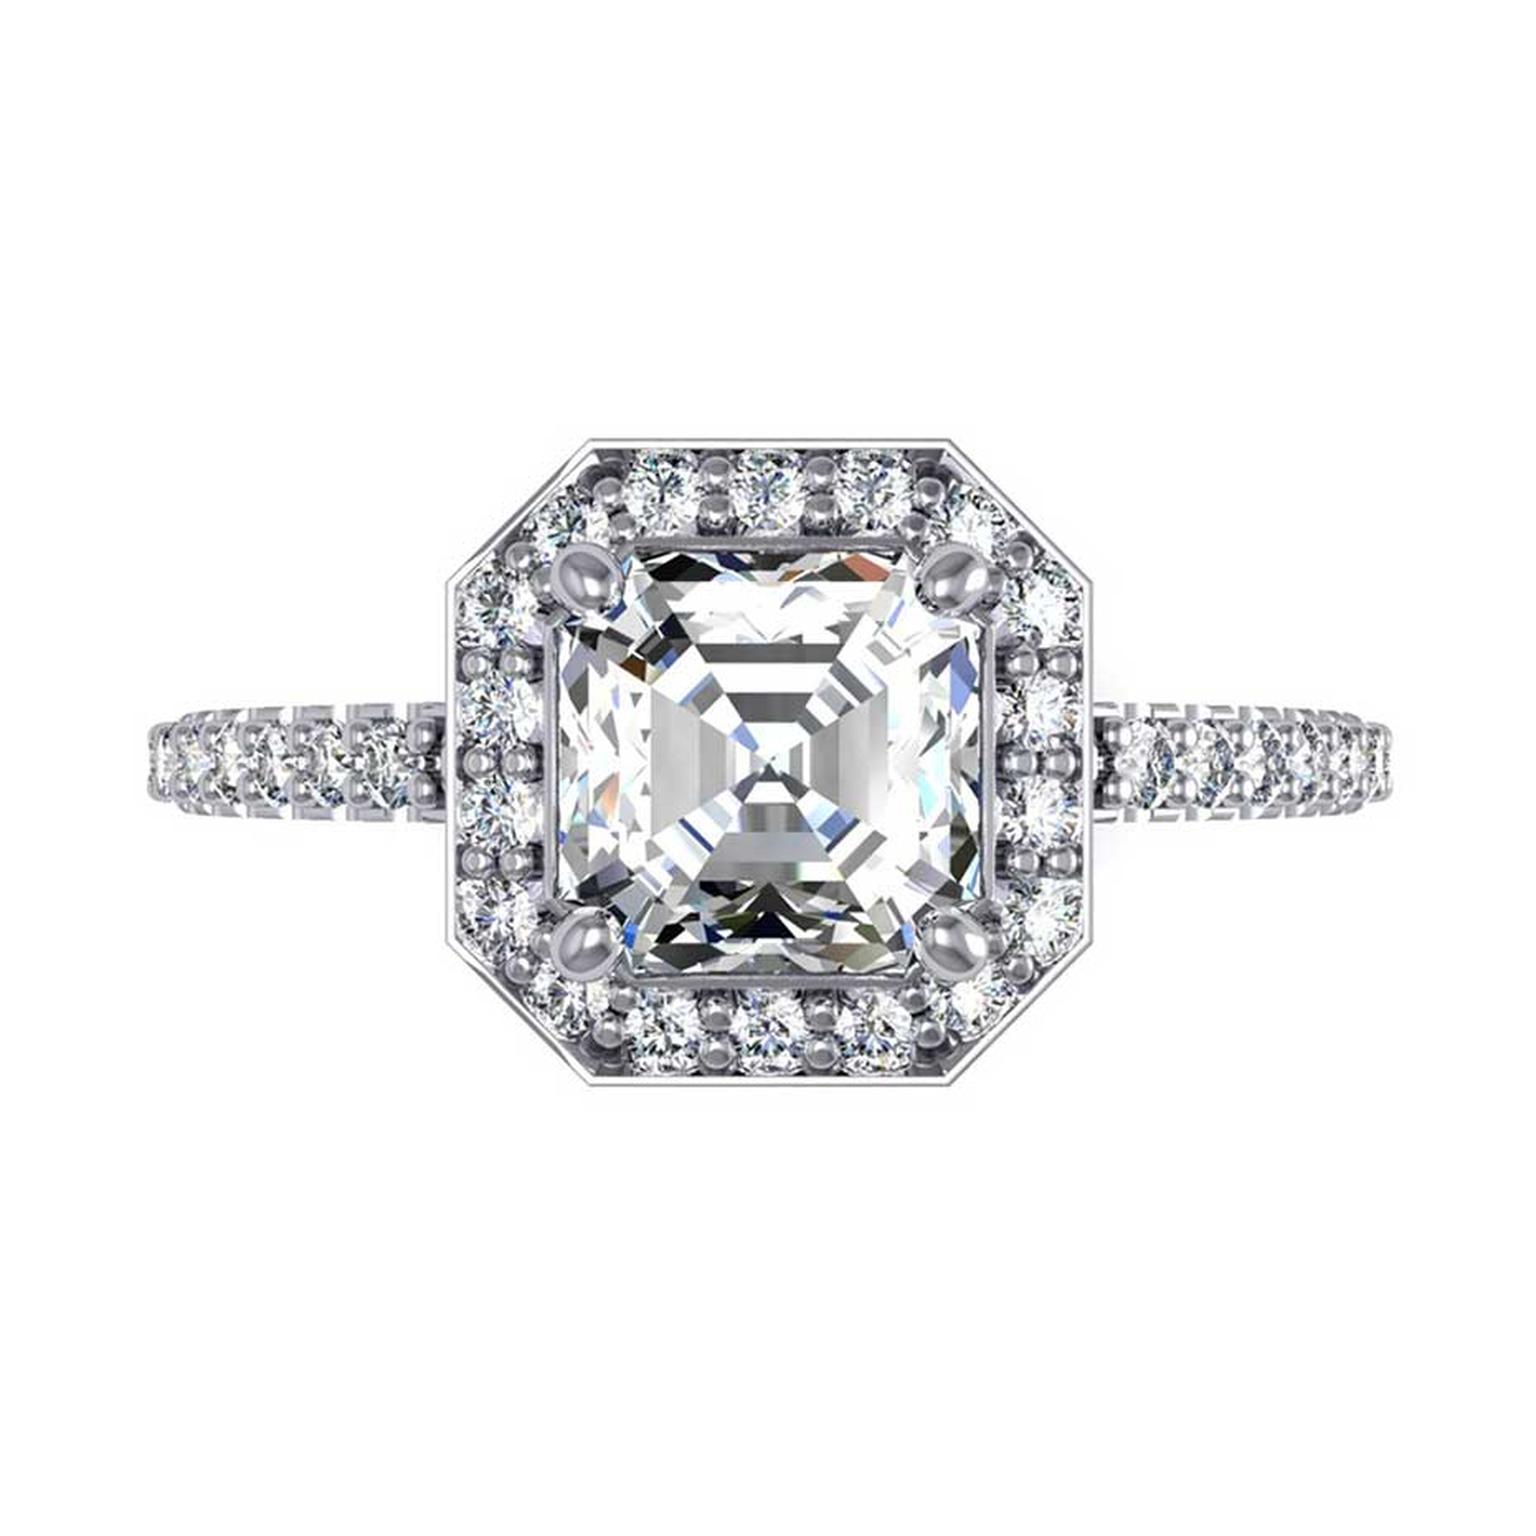 A cut above: why Asscher cut diamond engagement rings are back in the limelight